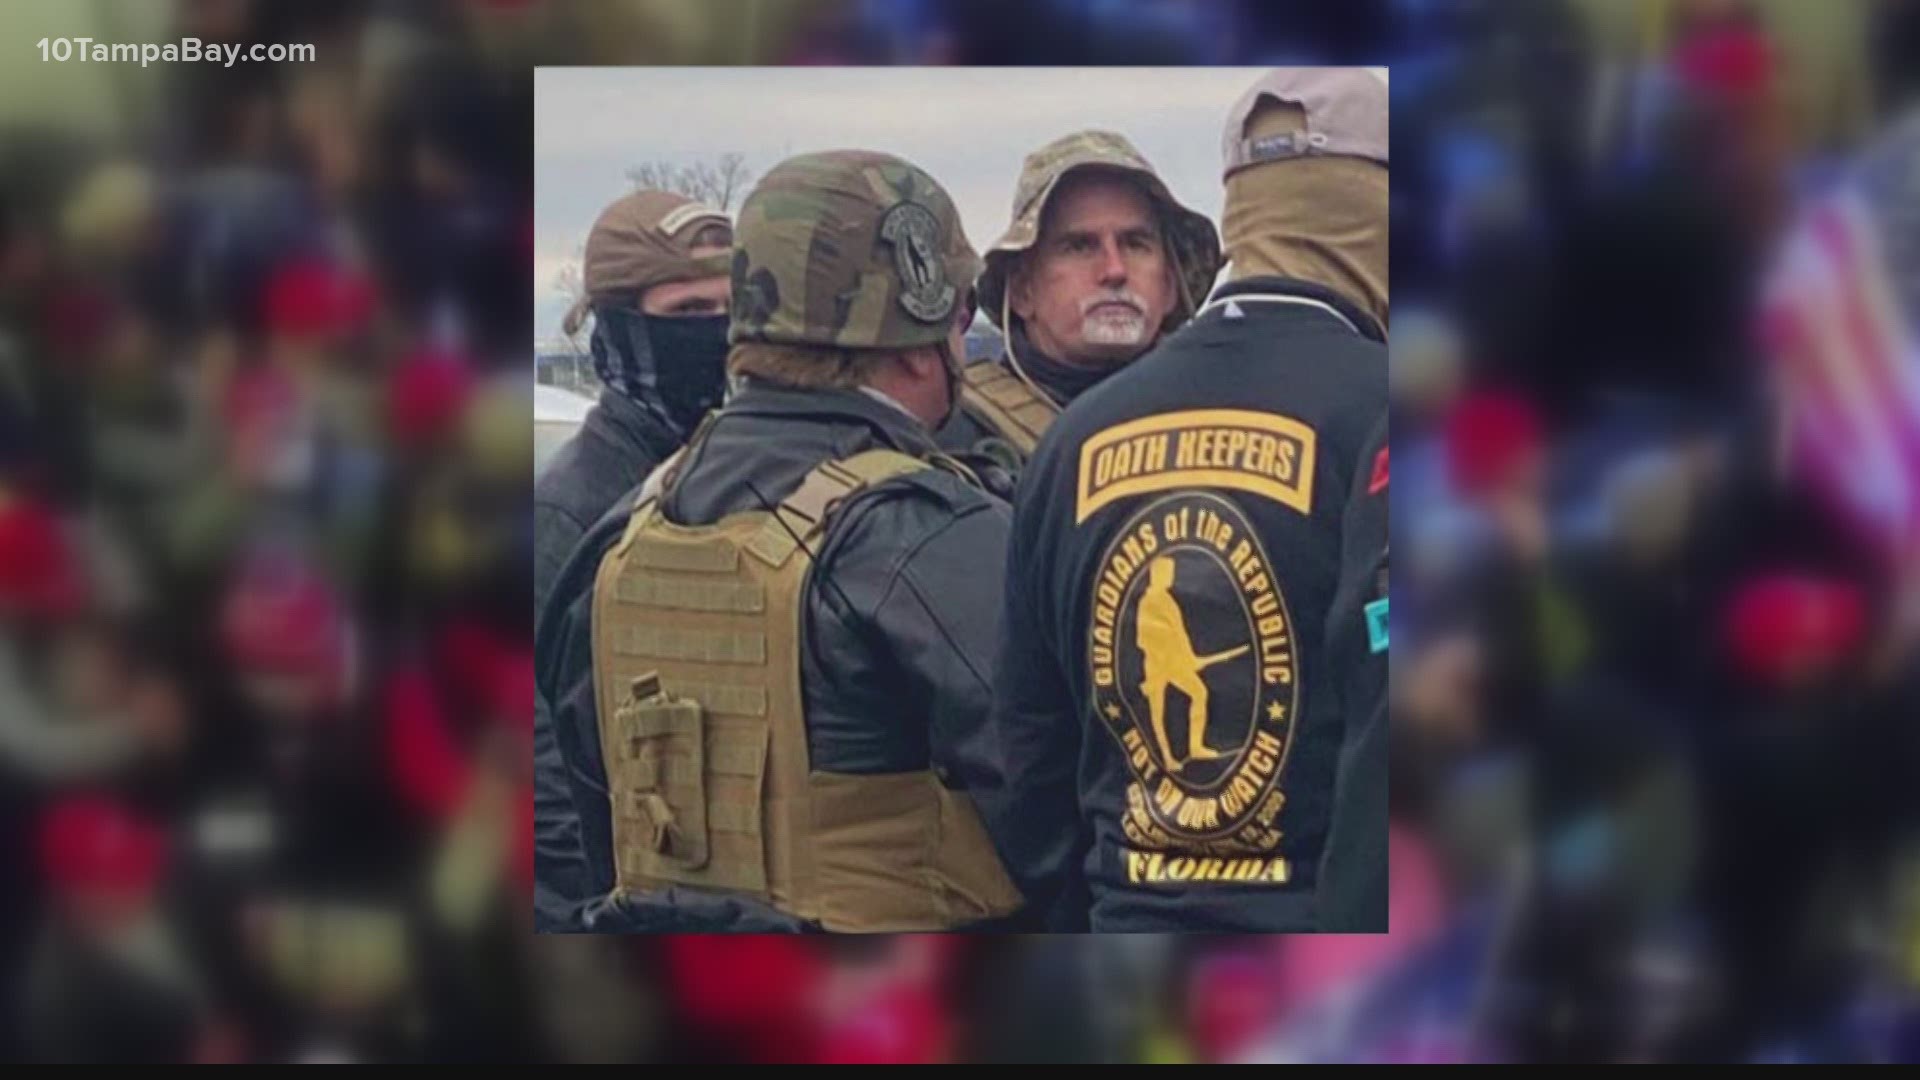 Graydon Young, of Englewood, is accused of being affiliated with the far-right antigovernmental organization known as the Oath Keepers.